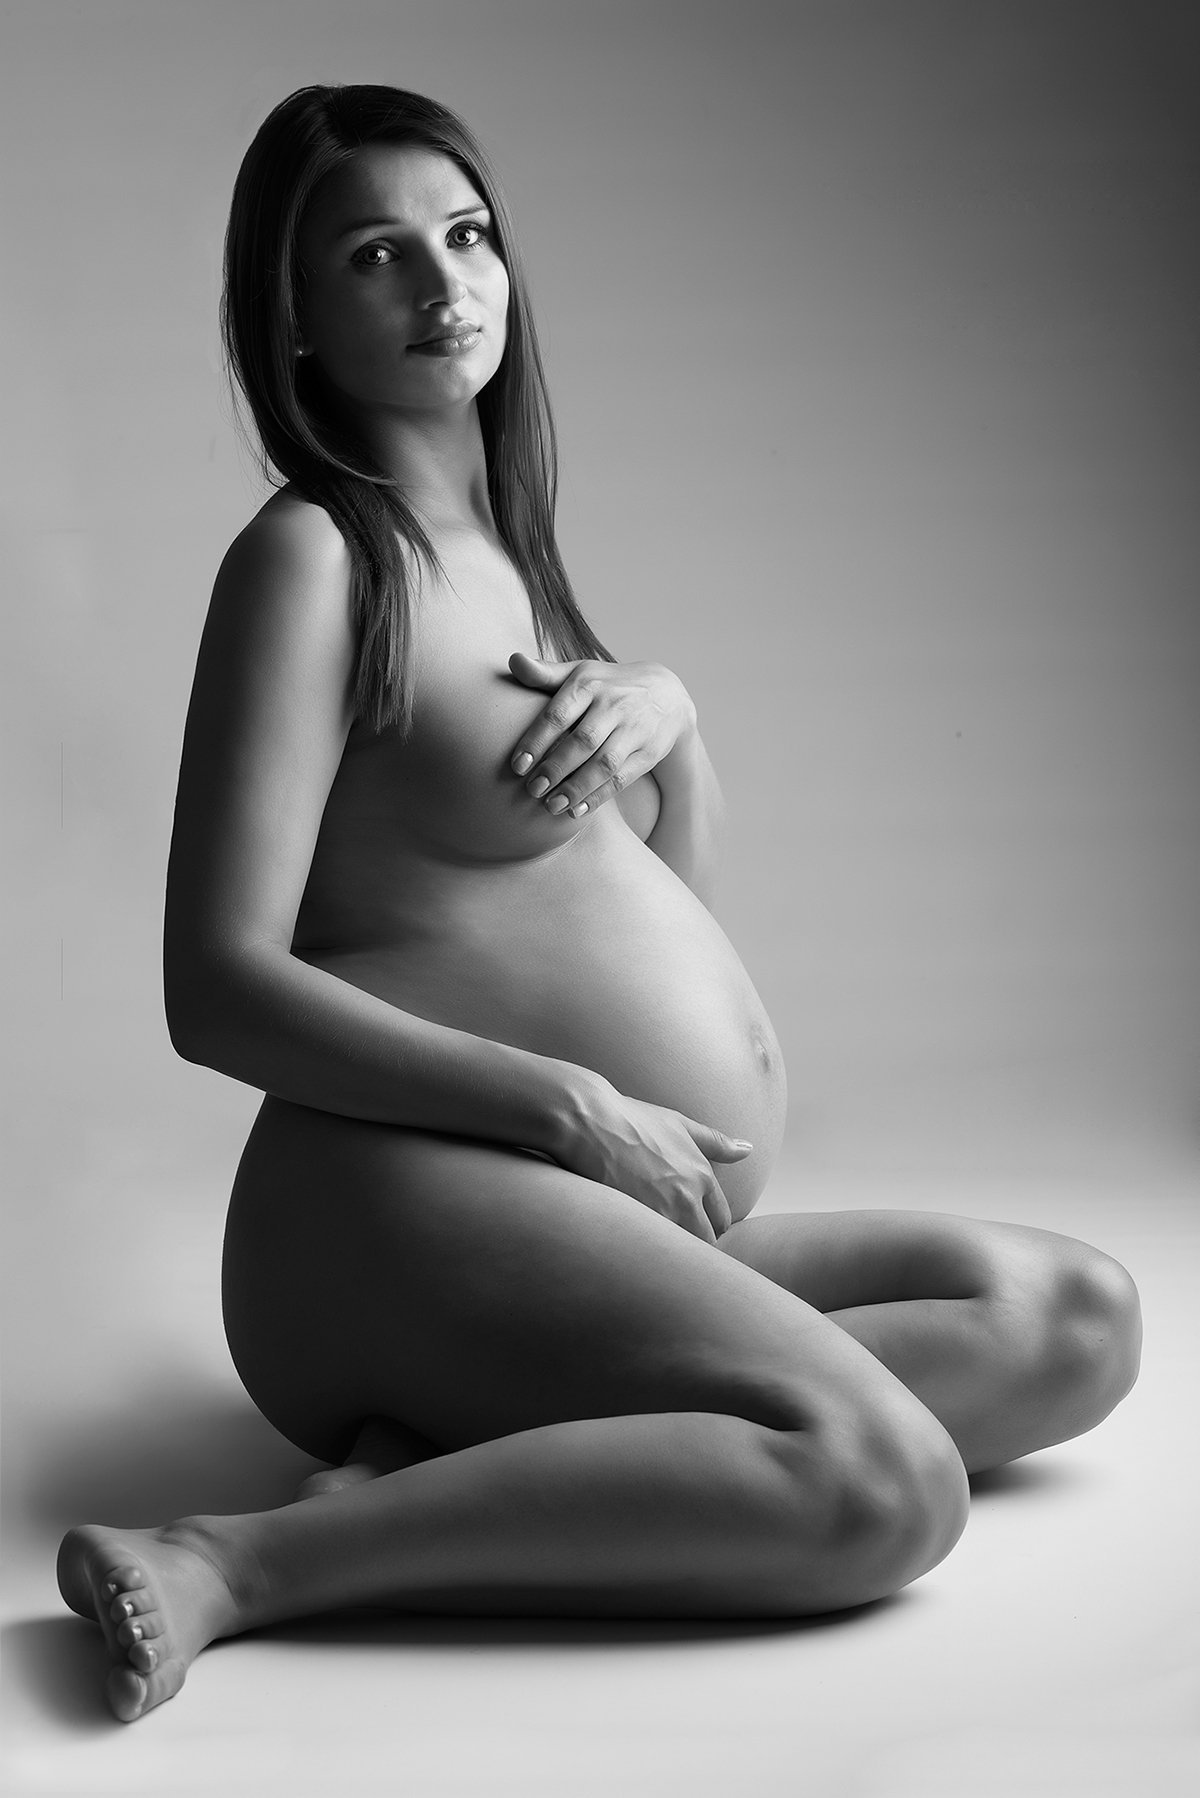 Pregnancy on Behance picture